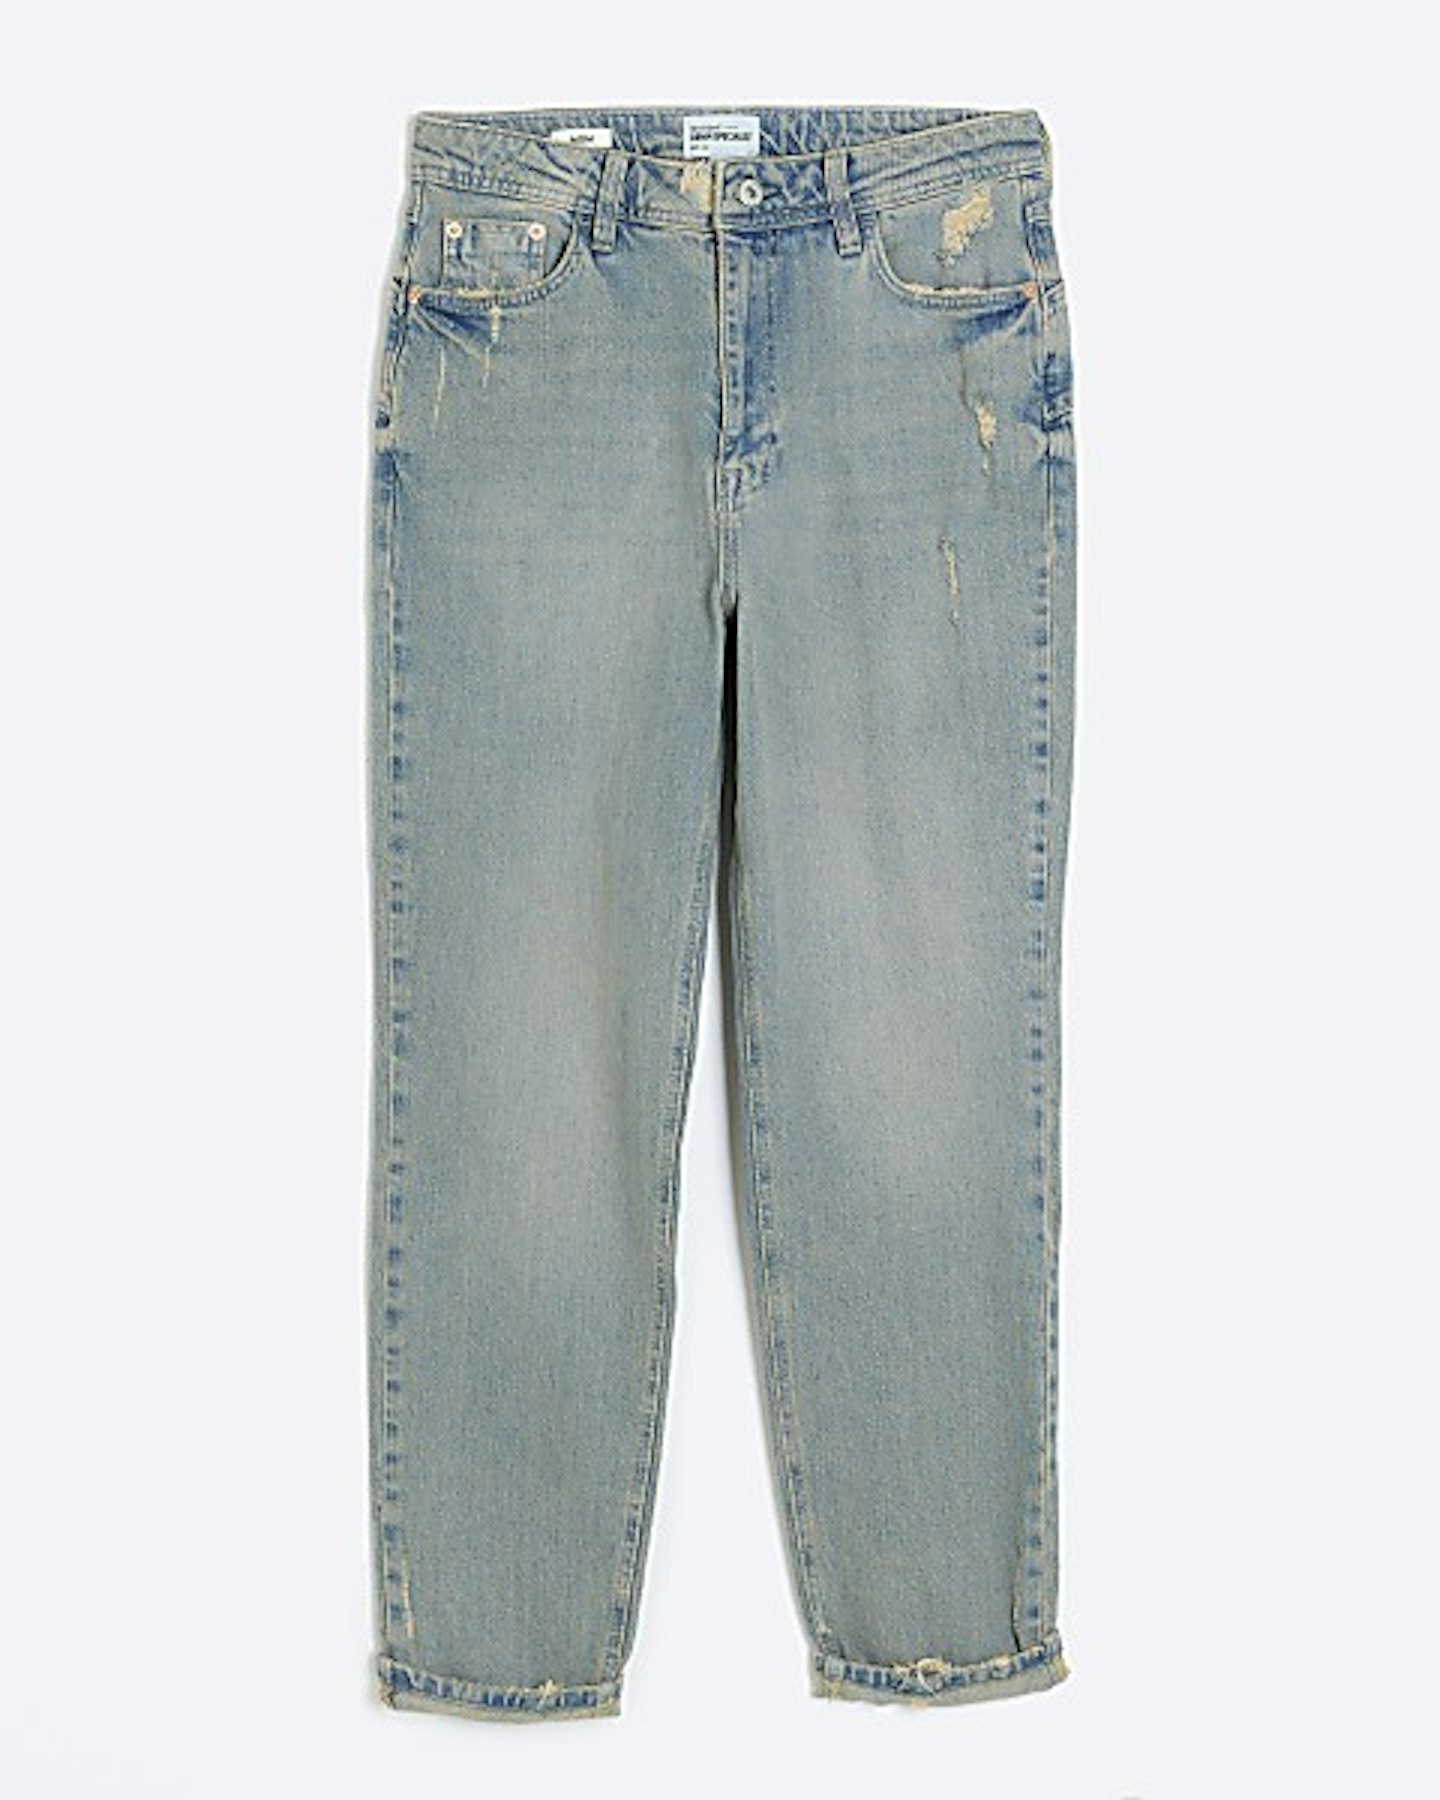 River Island, Blue High Waisted Mom Ripped Jeans